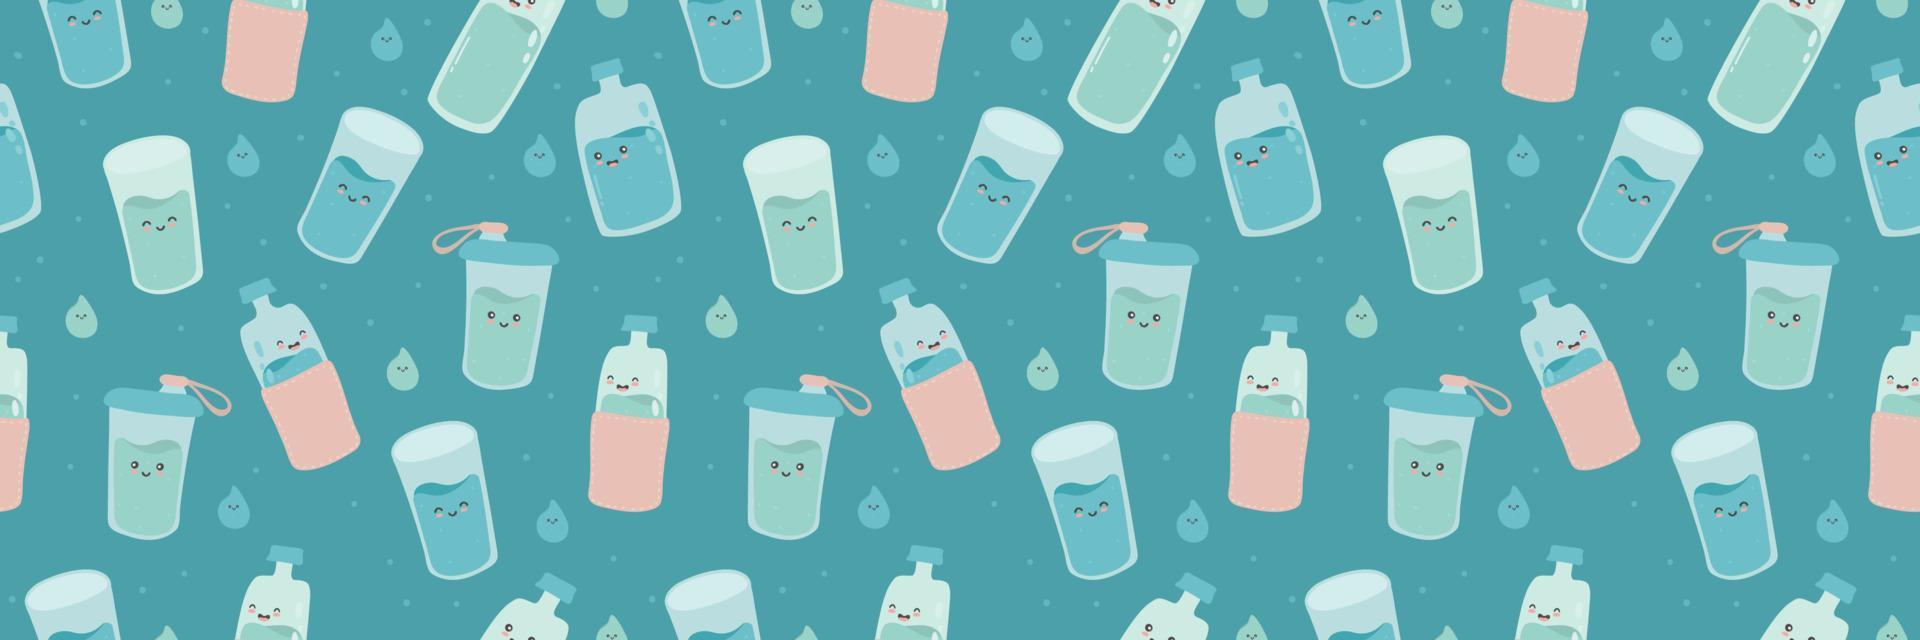 Seamless horizontal border, web baner with cute happy funny bottles and glasses. vector cartoon kawaii character water. Drink more water every day concept.